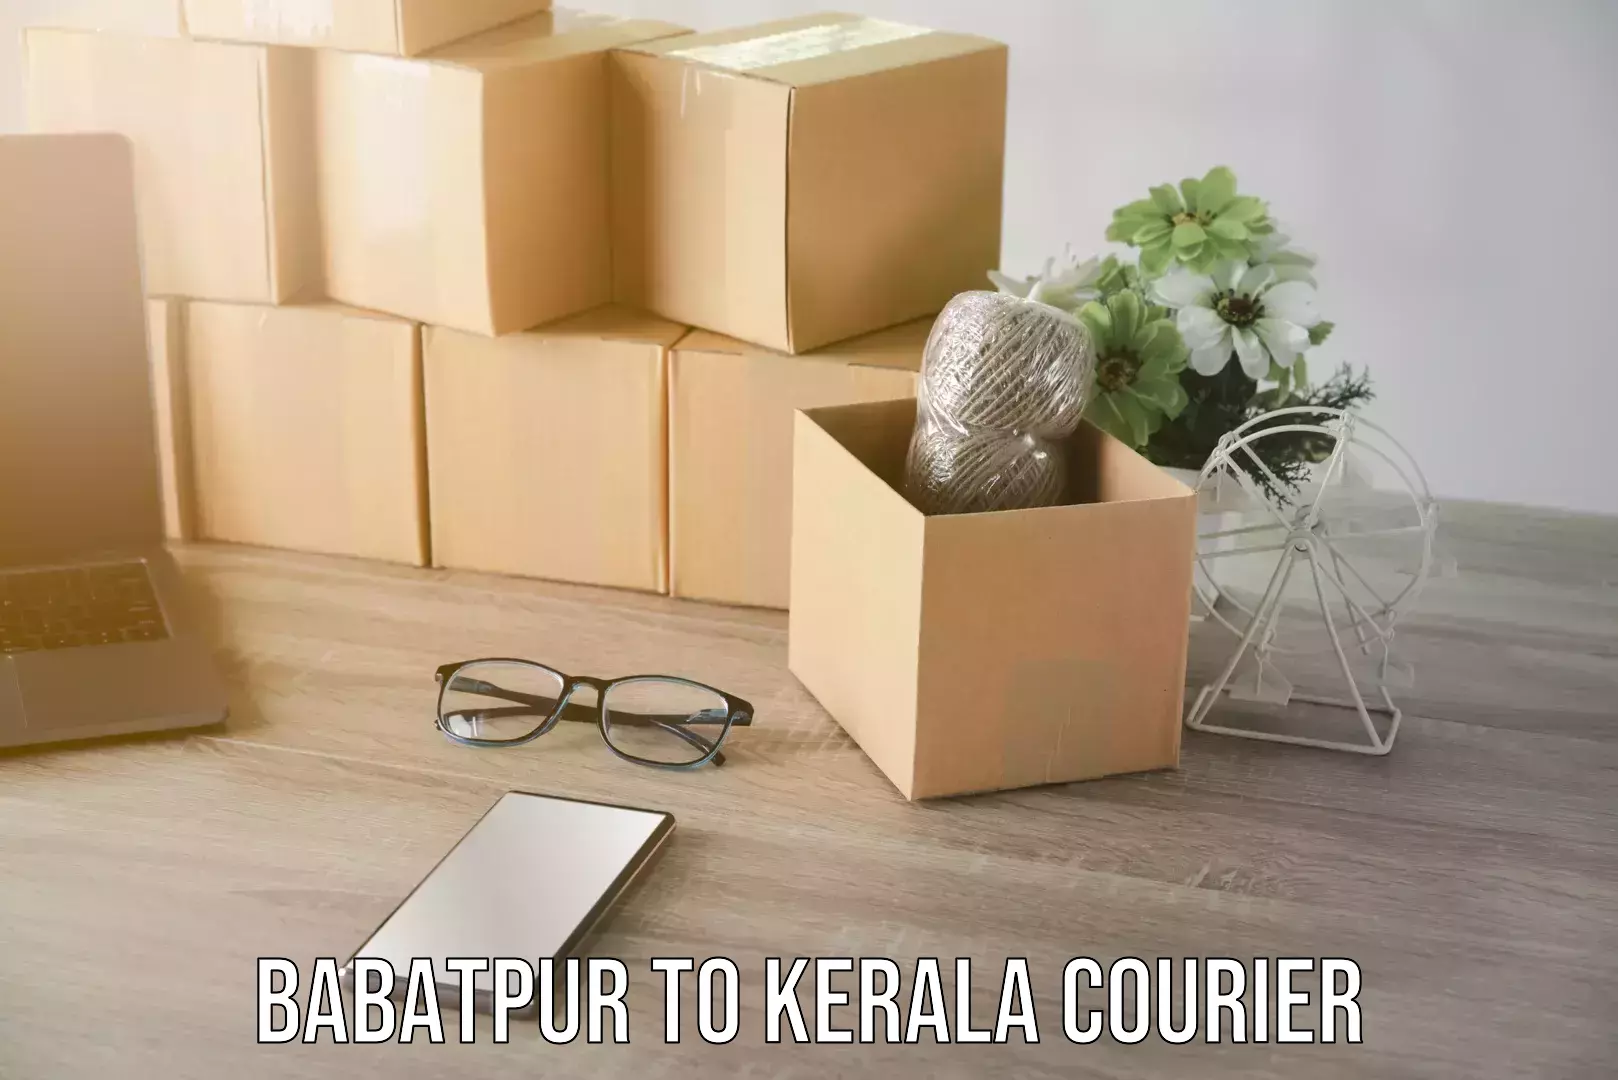 Local delivery service Babatpur to Kerala